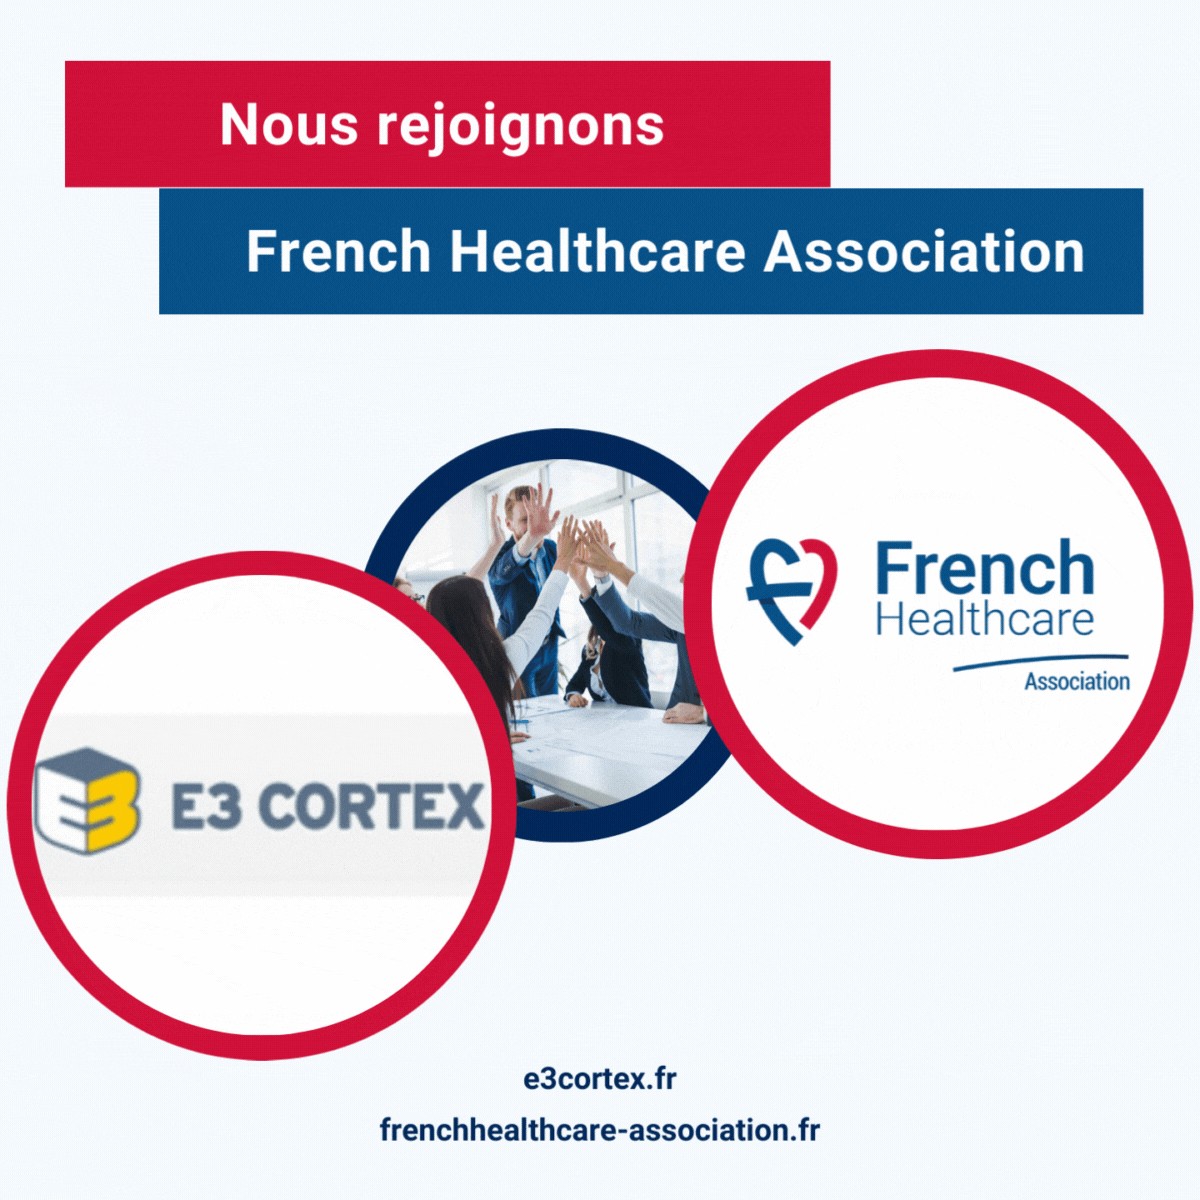 E3 CORTEX BECOMES A MEMBER OF THE FRENCH HEALTHCARE ASSOCIATION